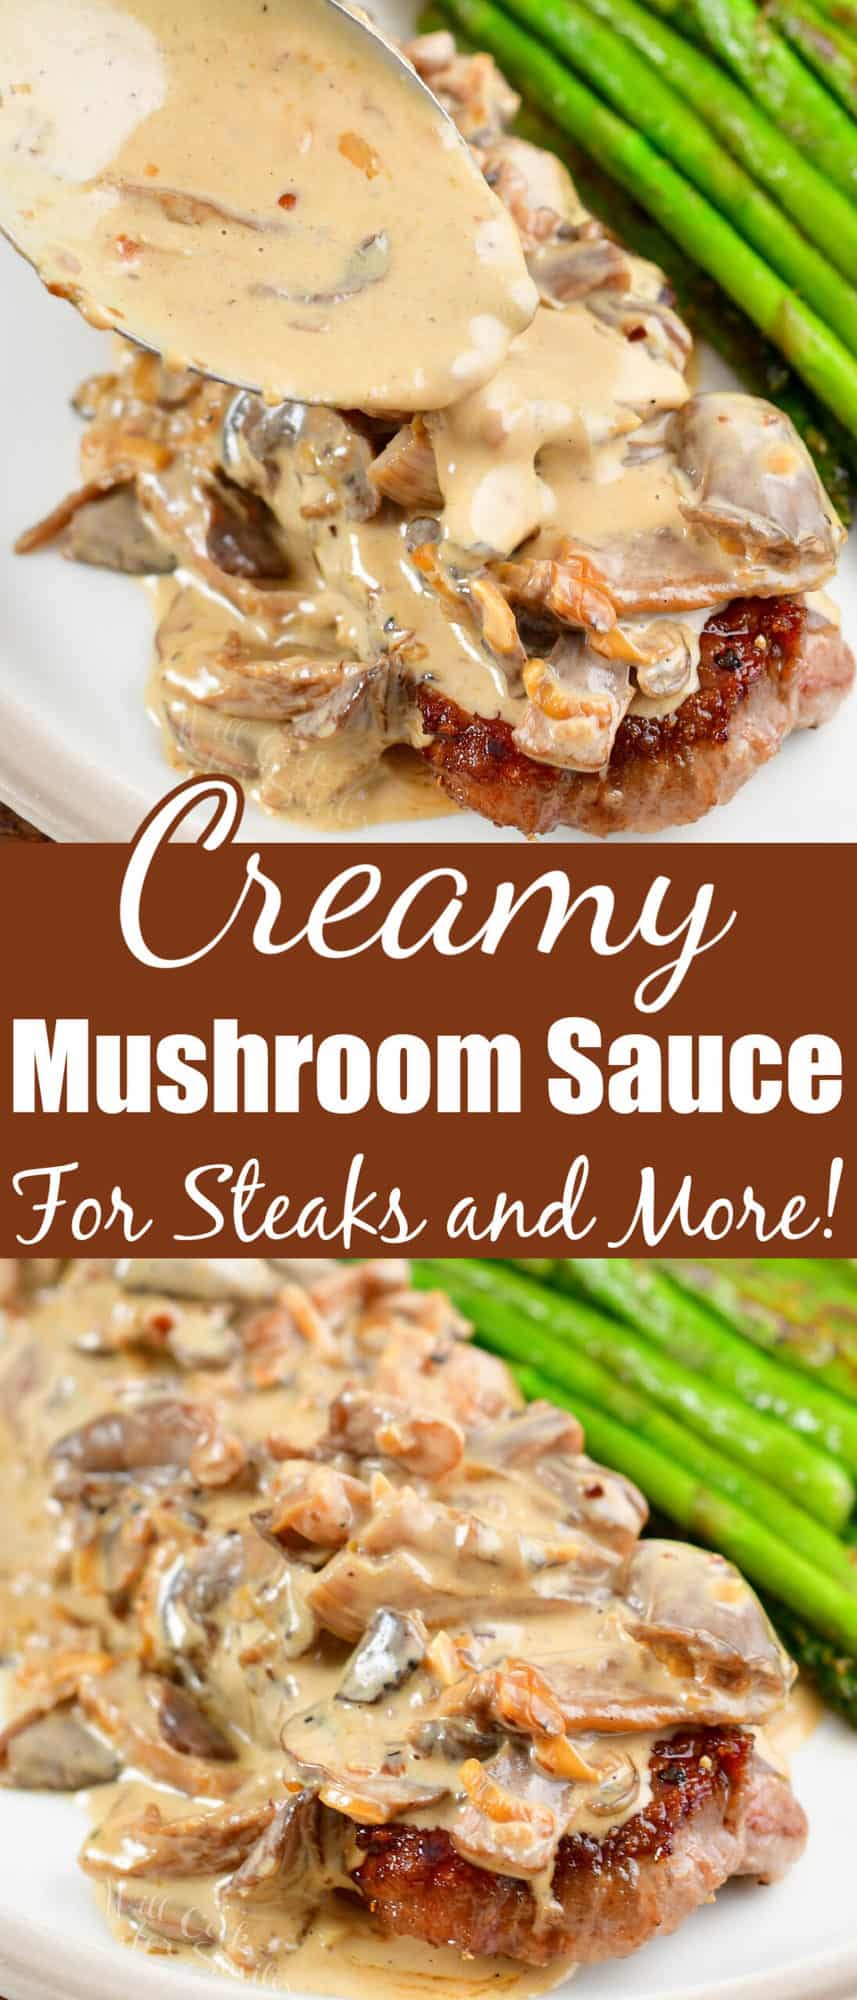 collage of two closeup images of mushrooms sauce on the steak and title